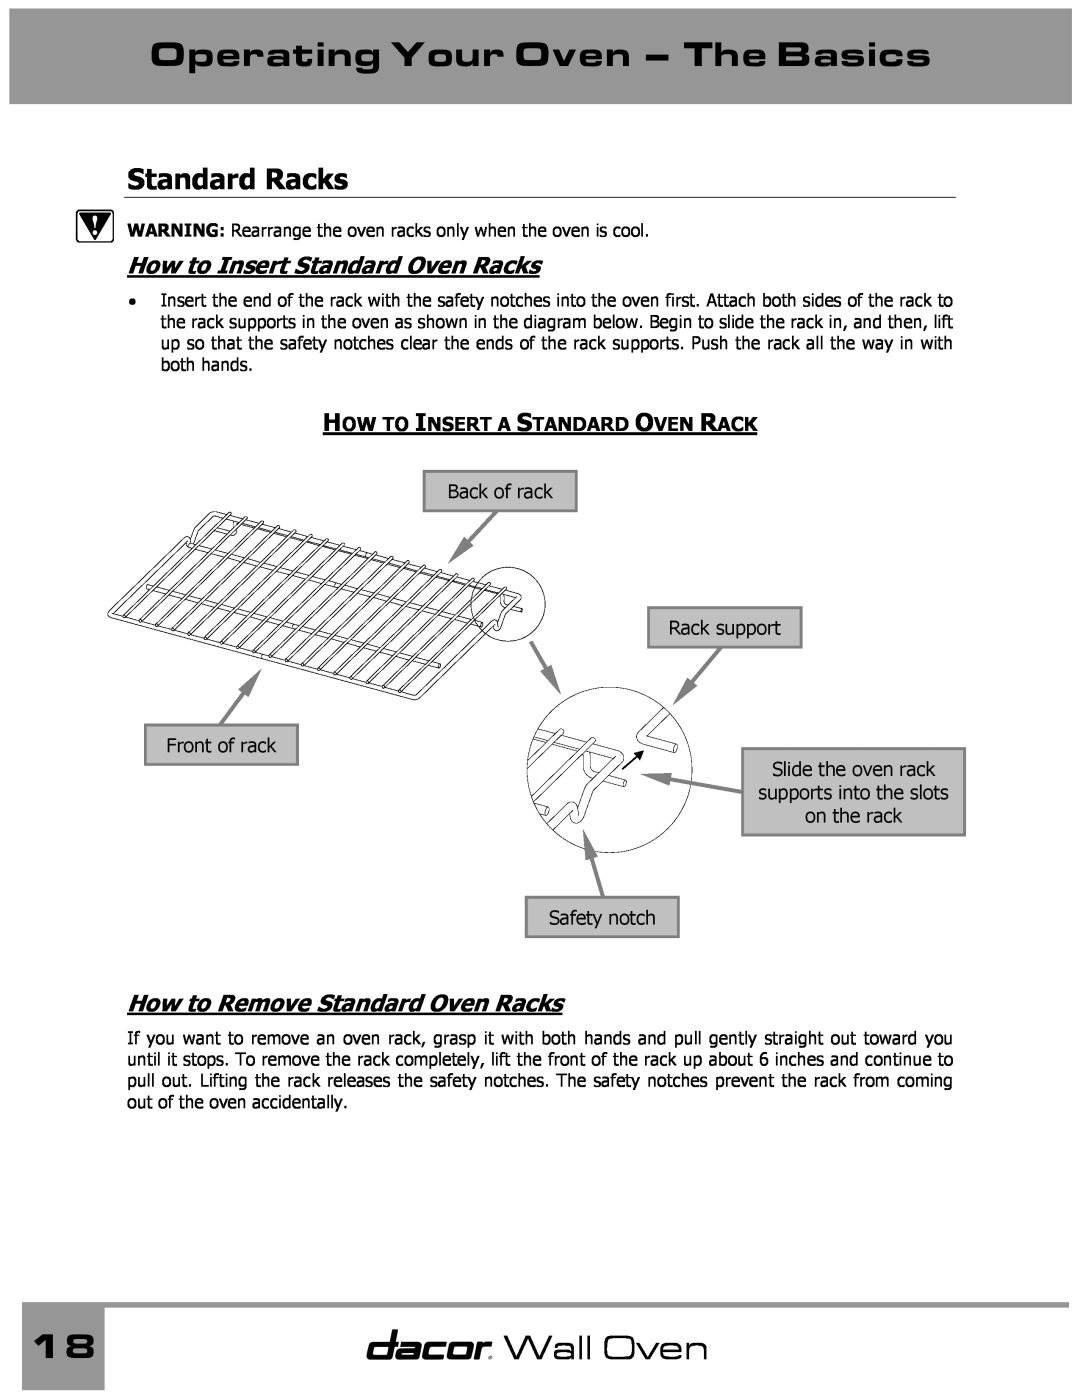 Dacor Wall Oven manual Operating Your Oven - The Basics, Standard Racks, How to Insert Standard Oven Racks 